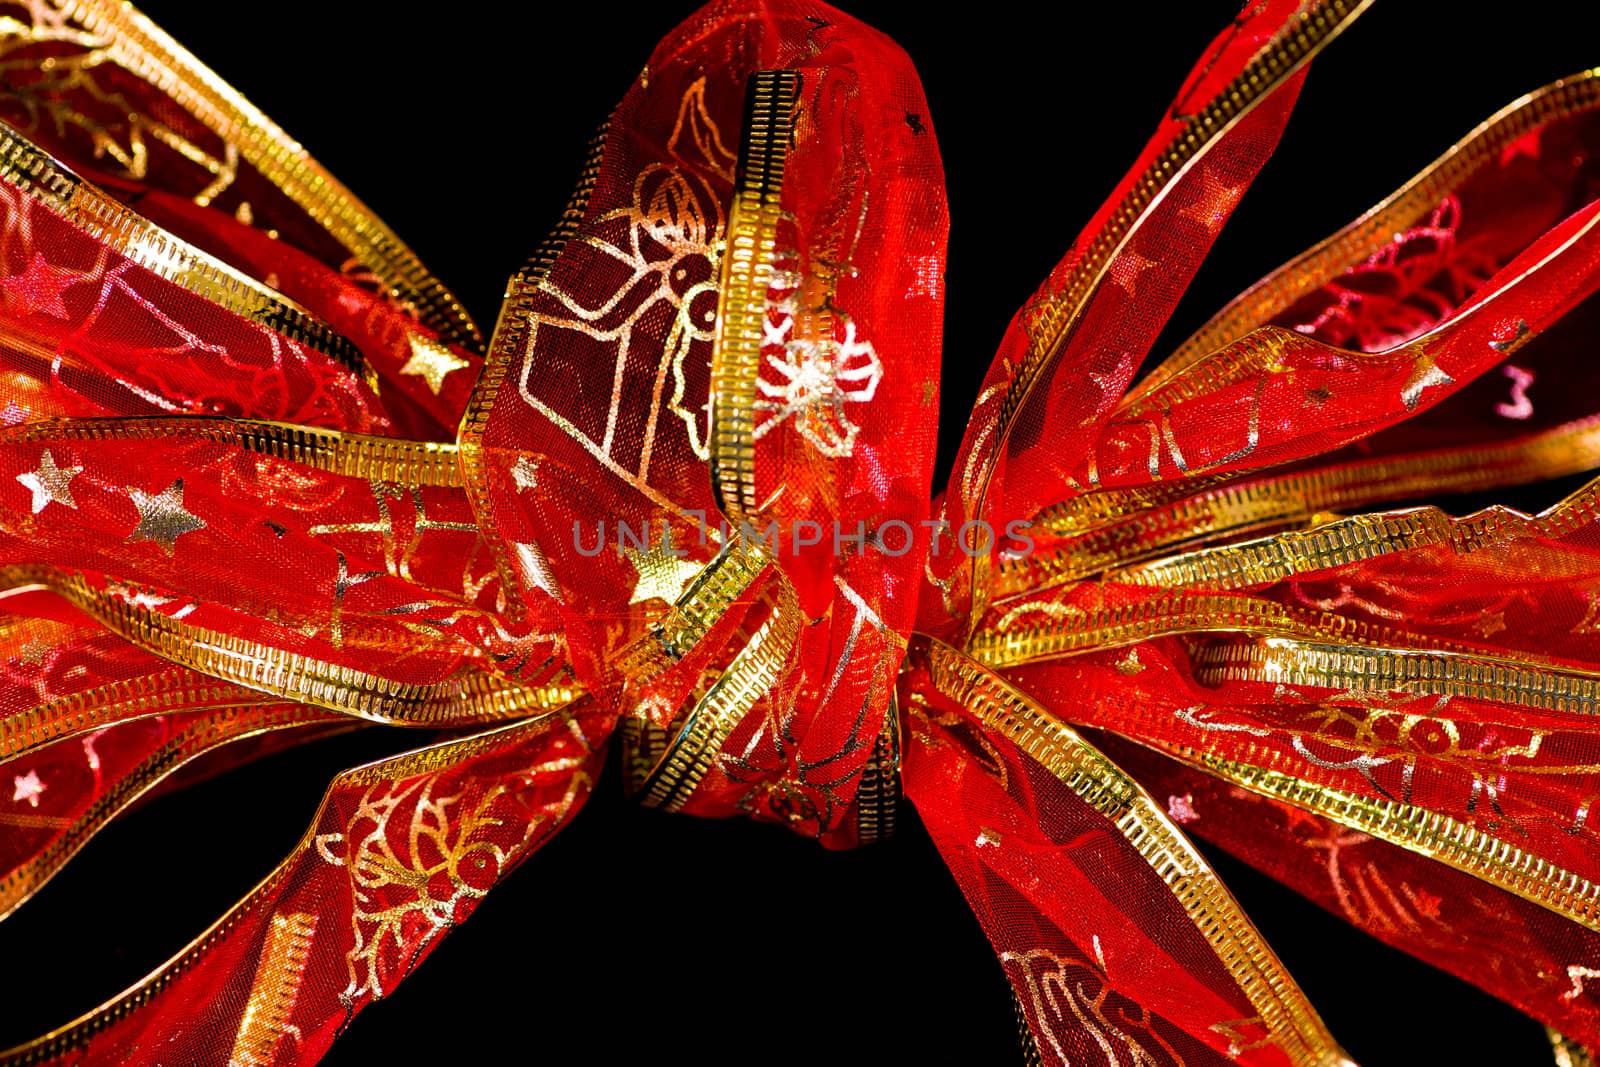 typical decoration of Christmas days in golden and red colors